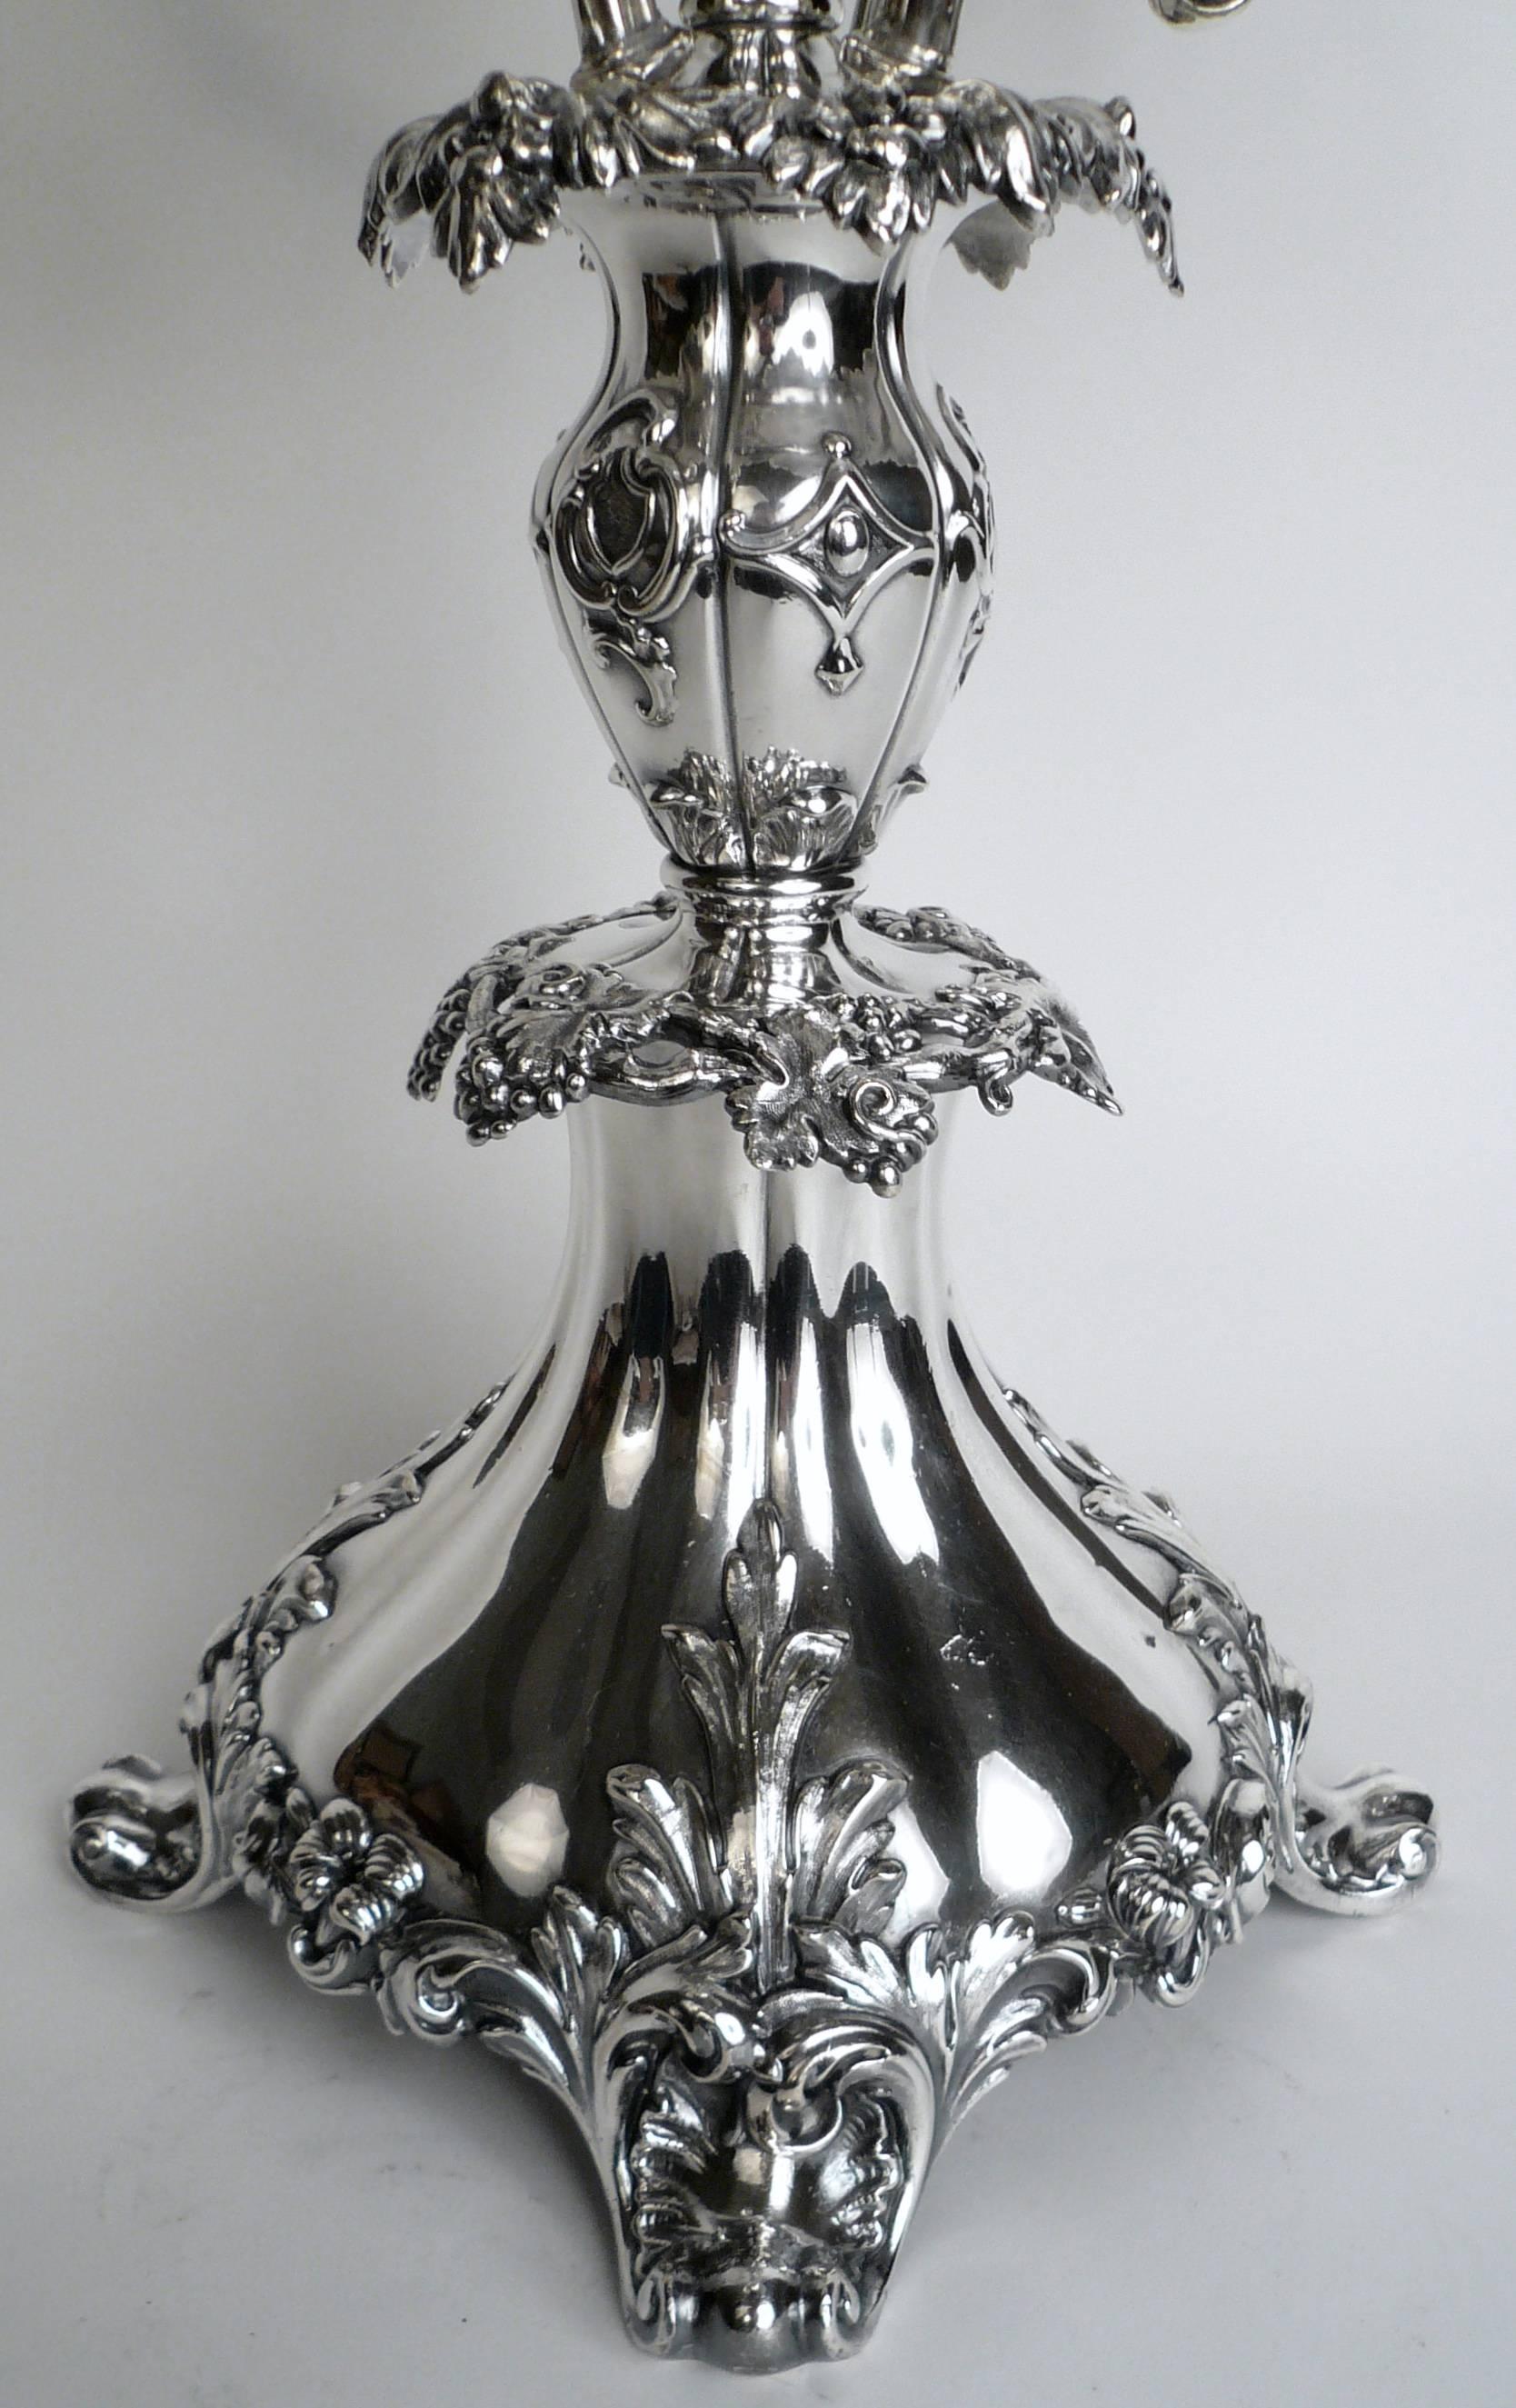 19th Century English Sheffield Plate Silver and Cut Crystal Epergne